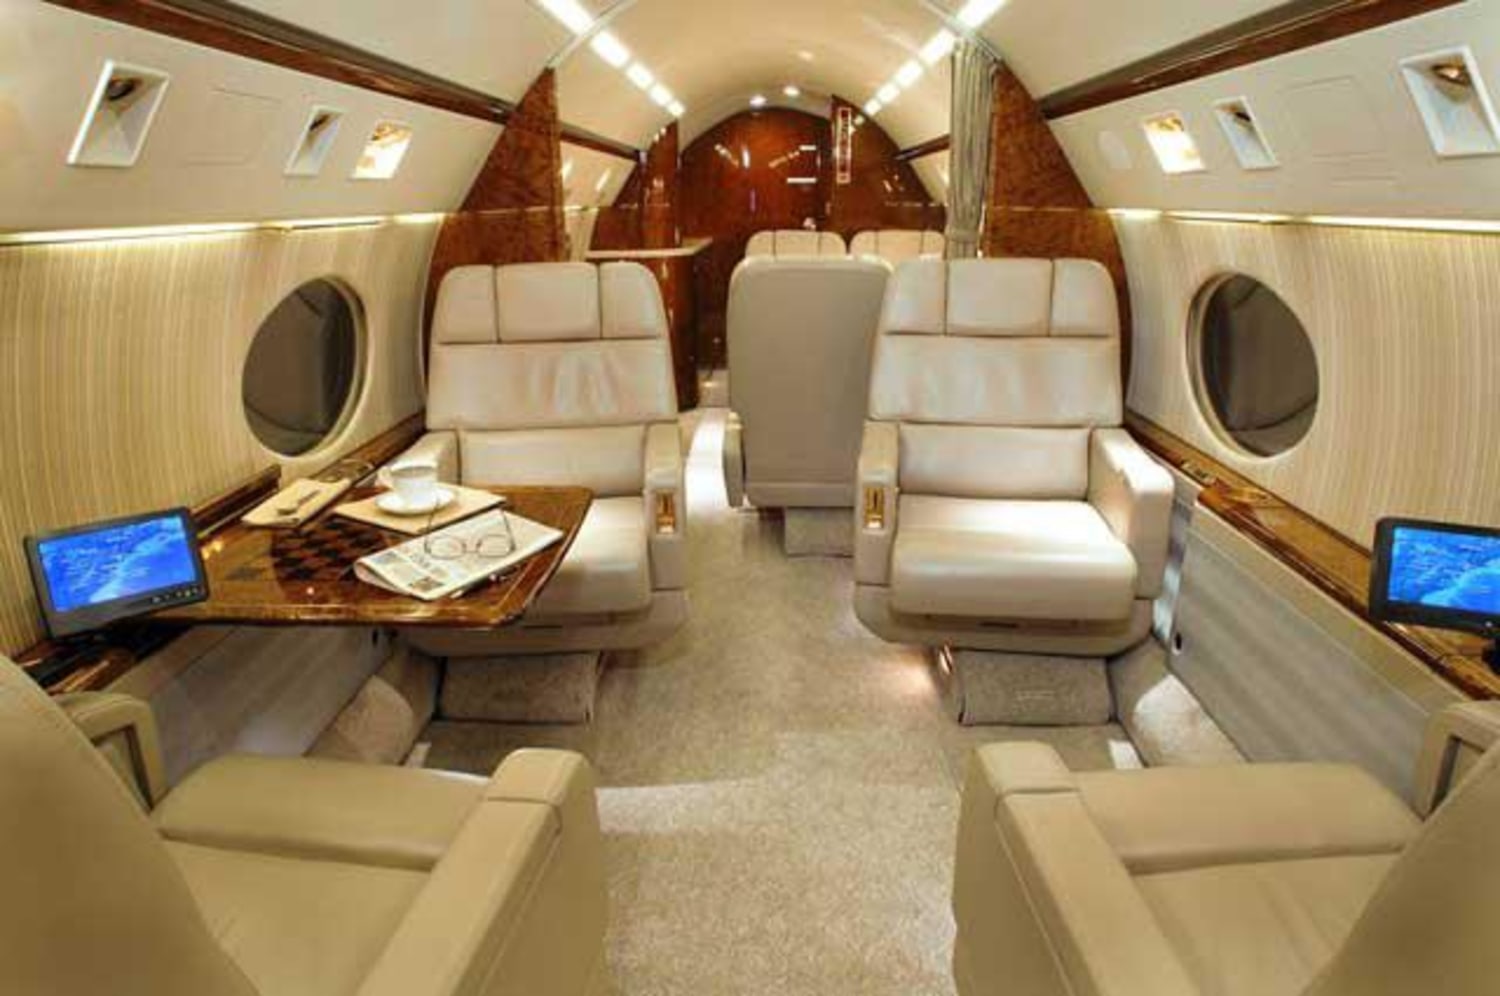 World's second richest man sells private jet to stop Twitter from